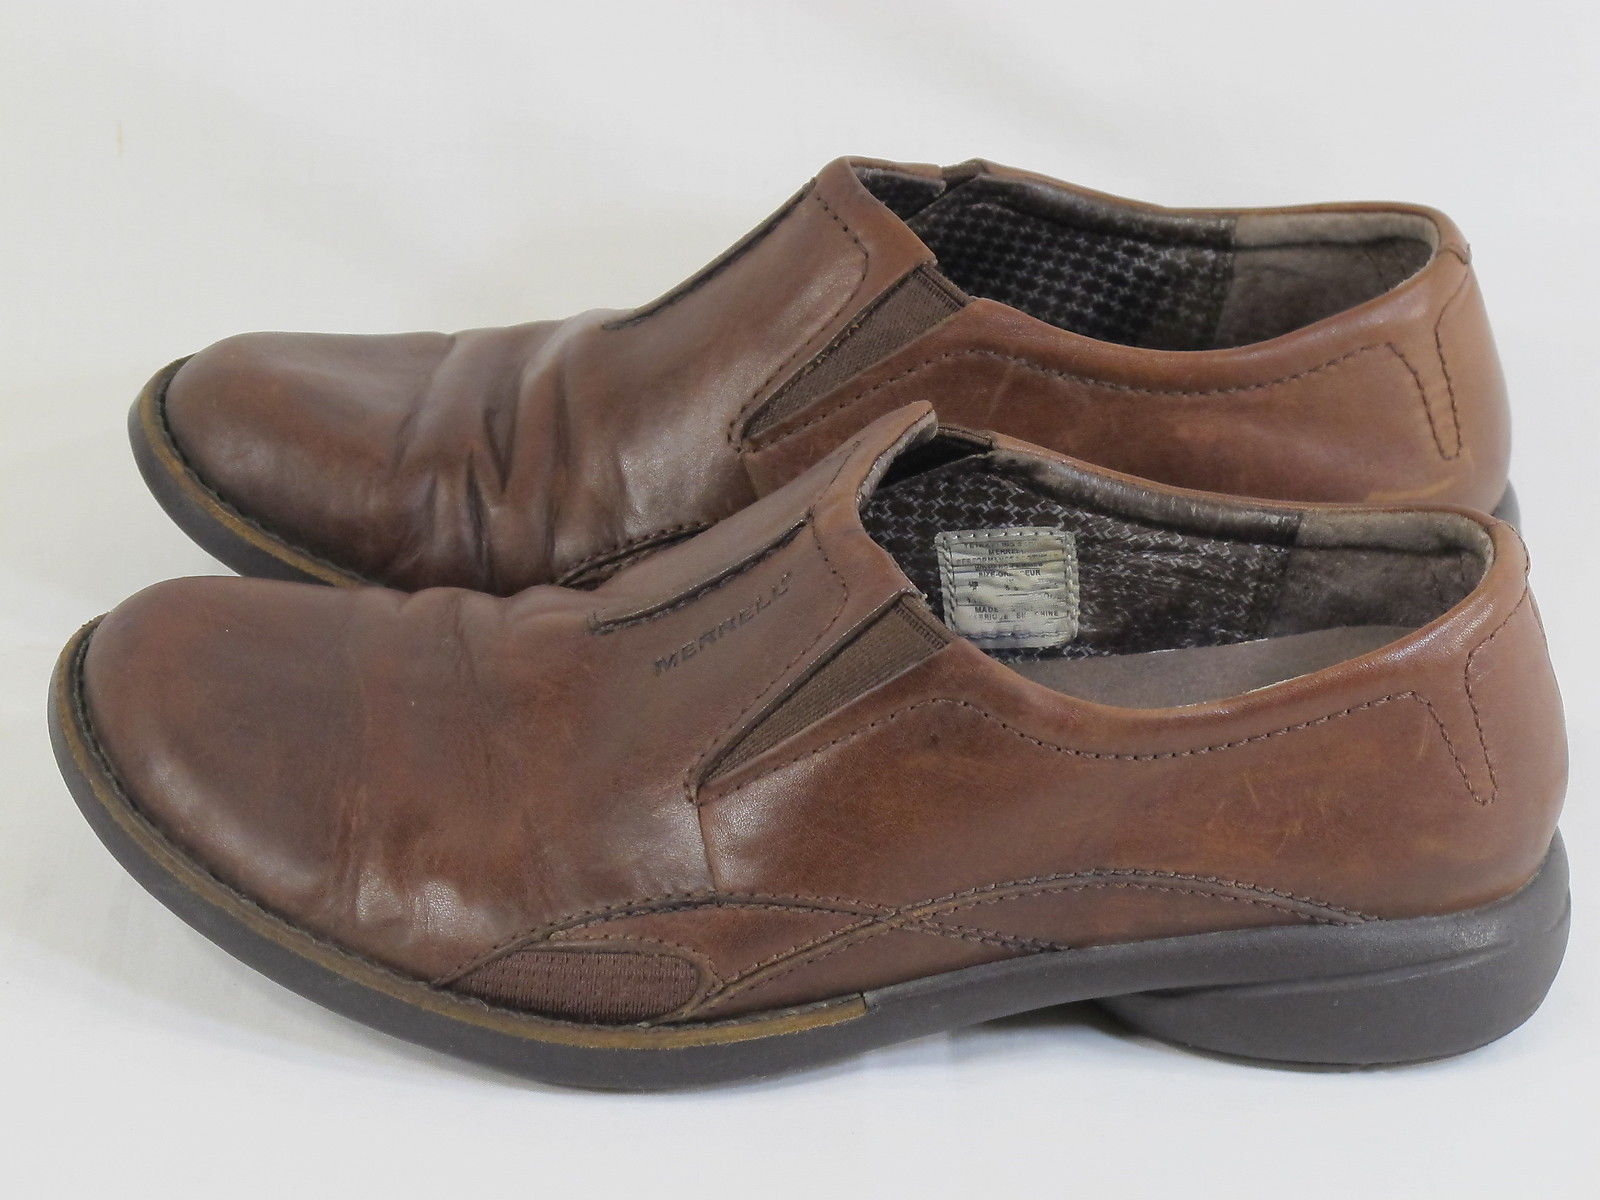 Merrell Tetra Brown Leather Loafer Shoes Womens Size 8 M US Excellent ...